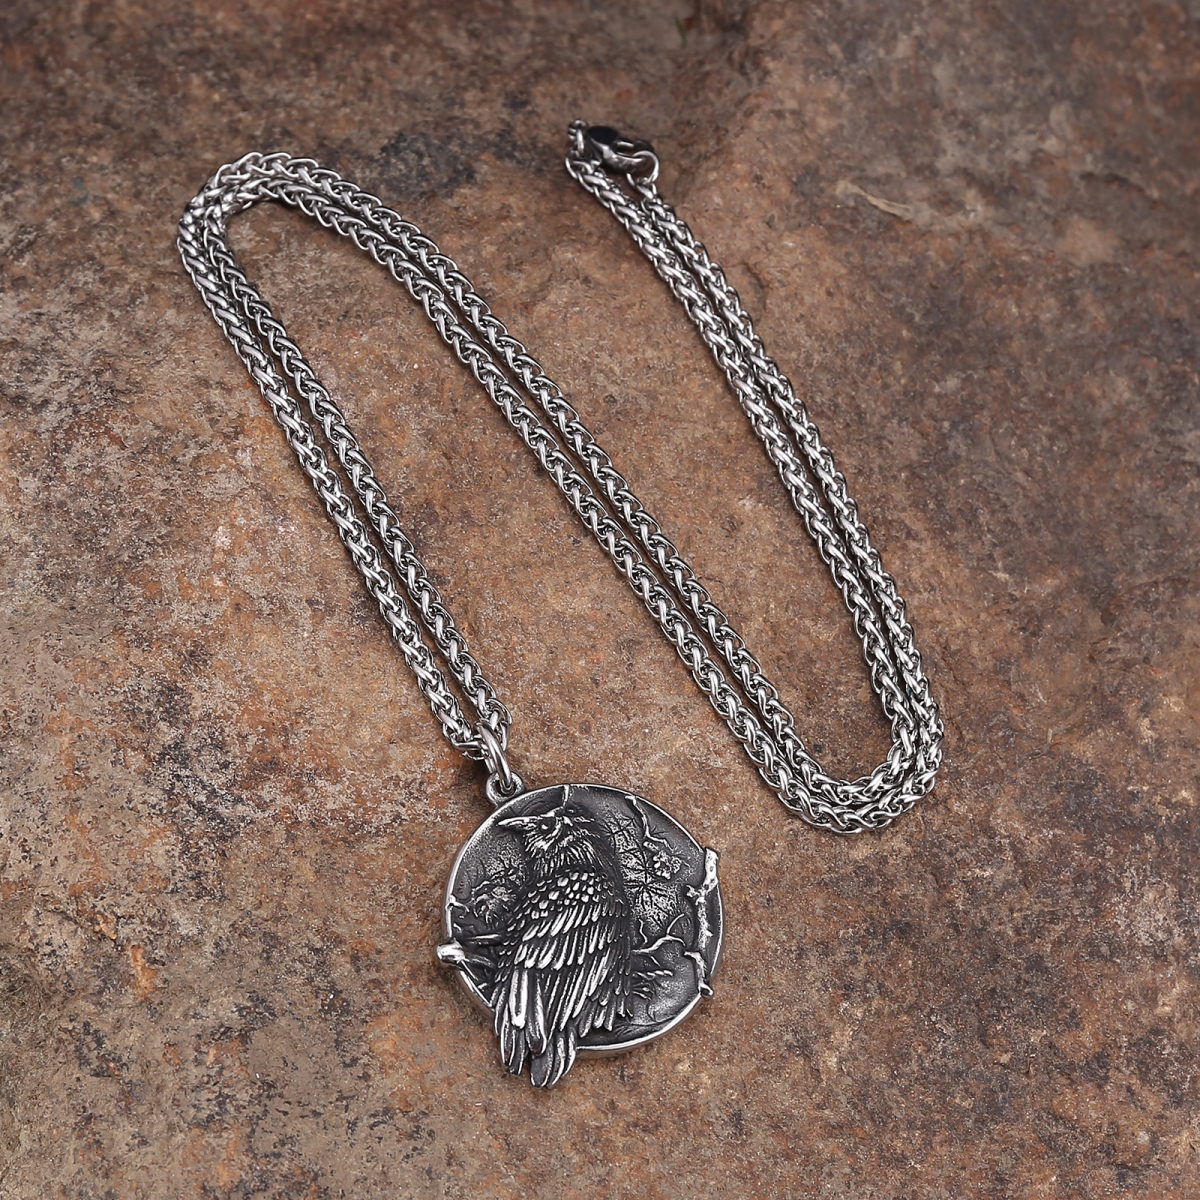 Owl Necklace US$3.2/PC-NORSECOLLECTION- Viking Jewelry,Viking Necklace,Viking Bracelet,Viking Rings,Viking Mugs,Viking Accessories,Viking Crafts